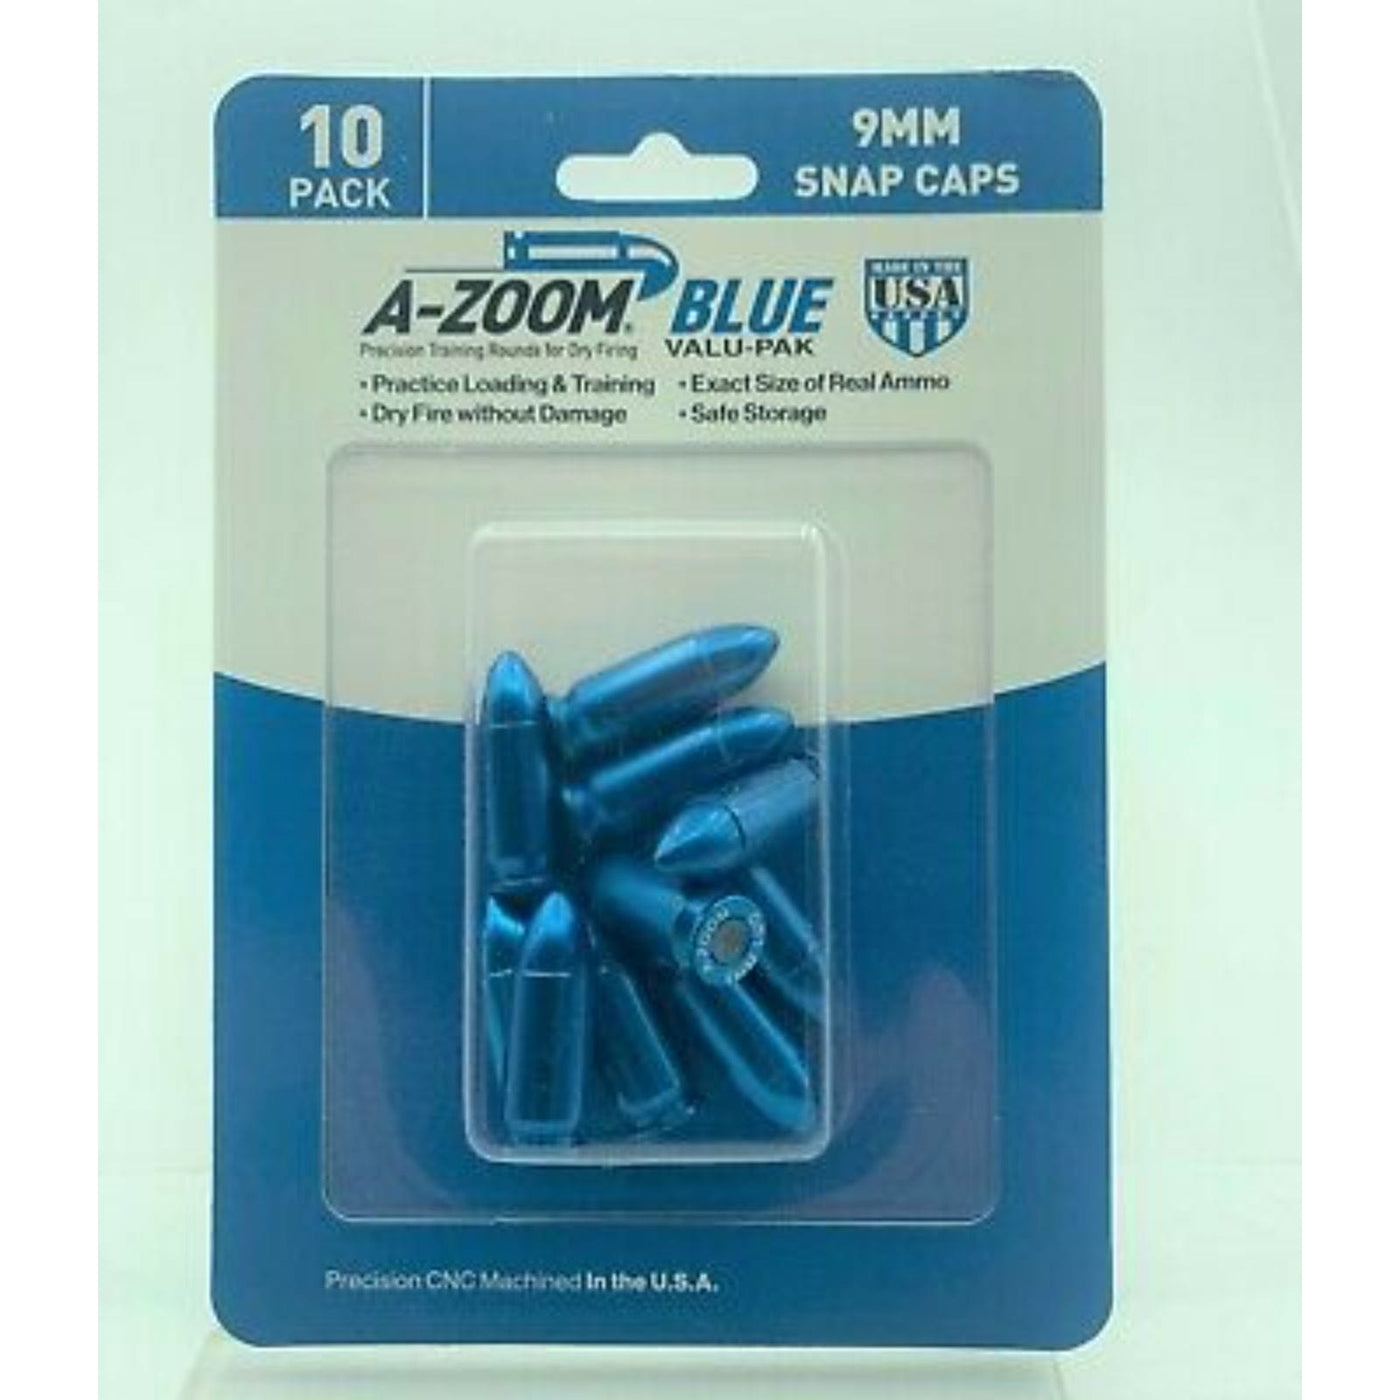 A-ZOOM A-ZOOM 9MM LUGER Snap Cap BLUE 10PK Shooting